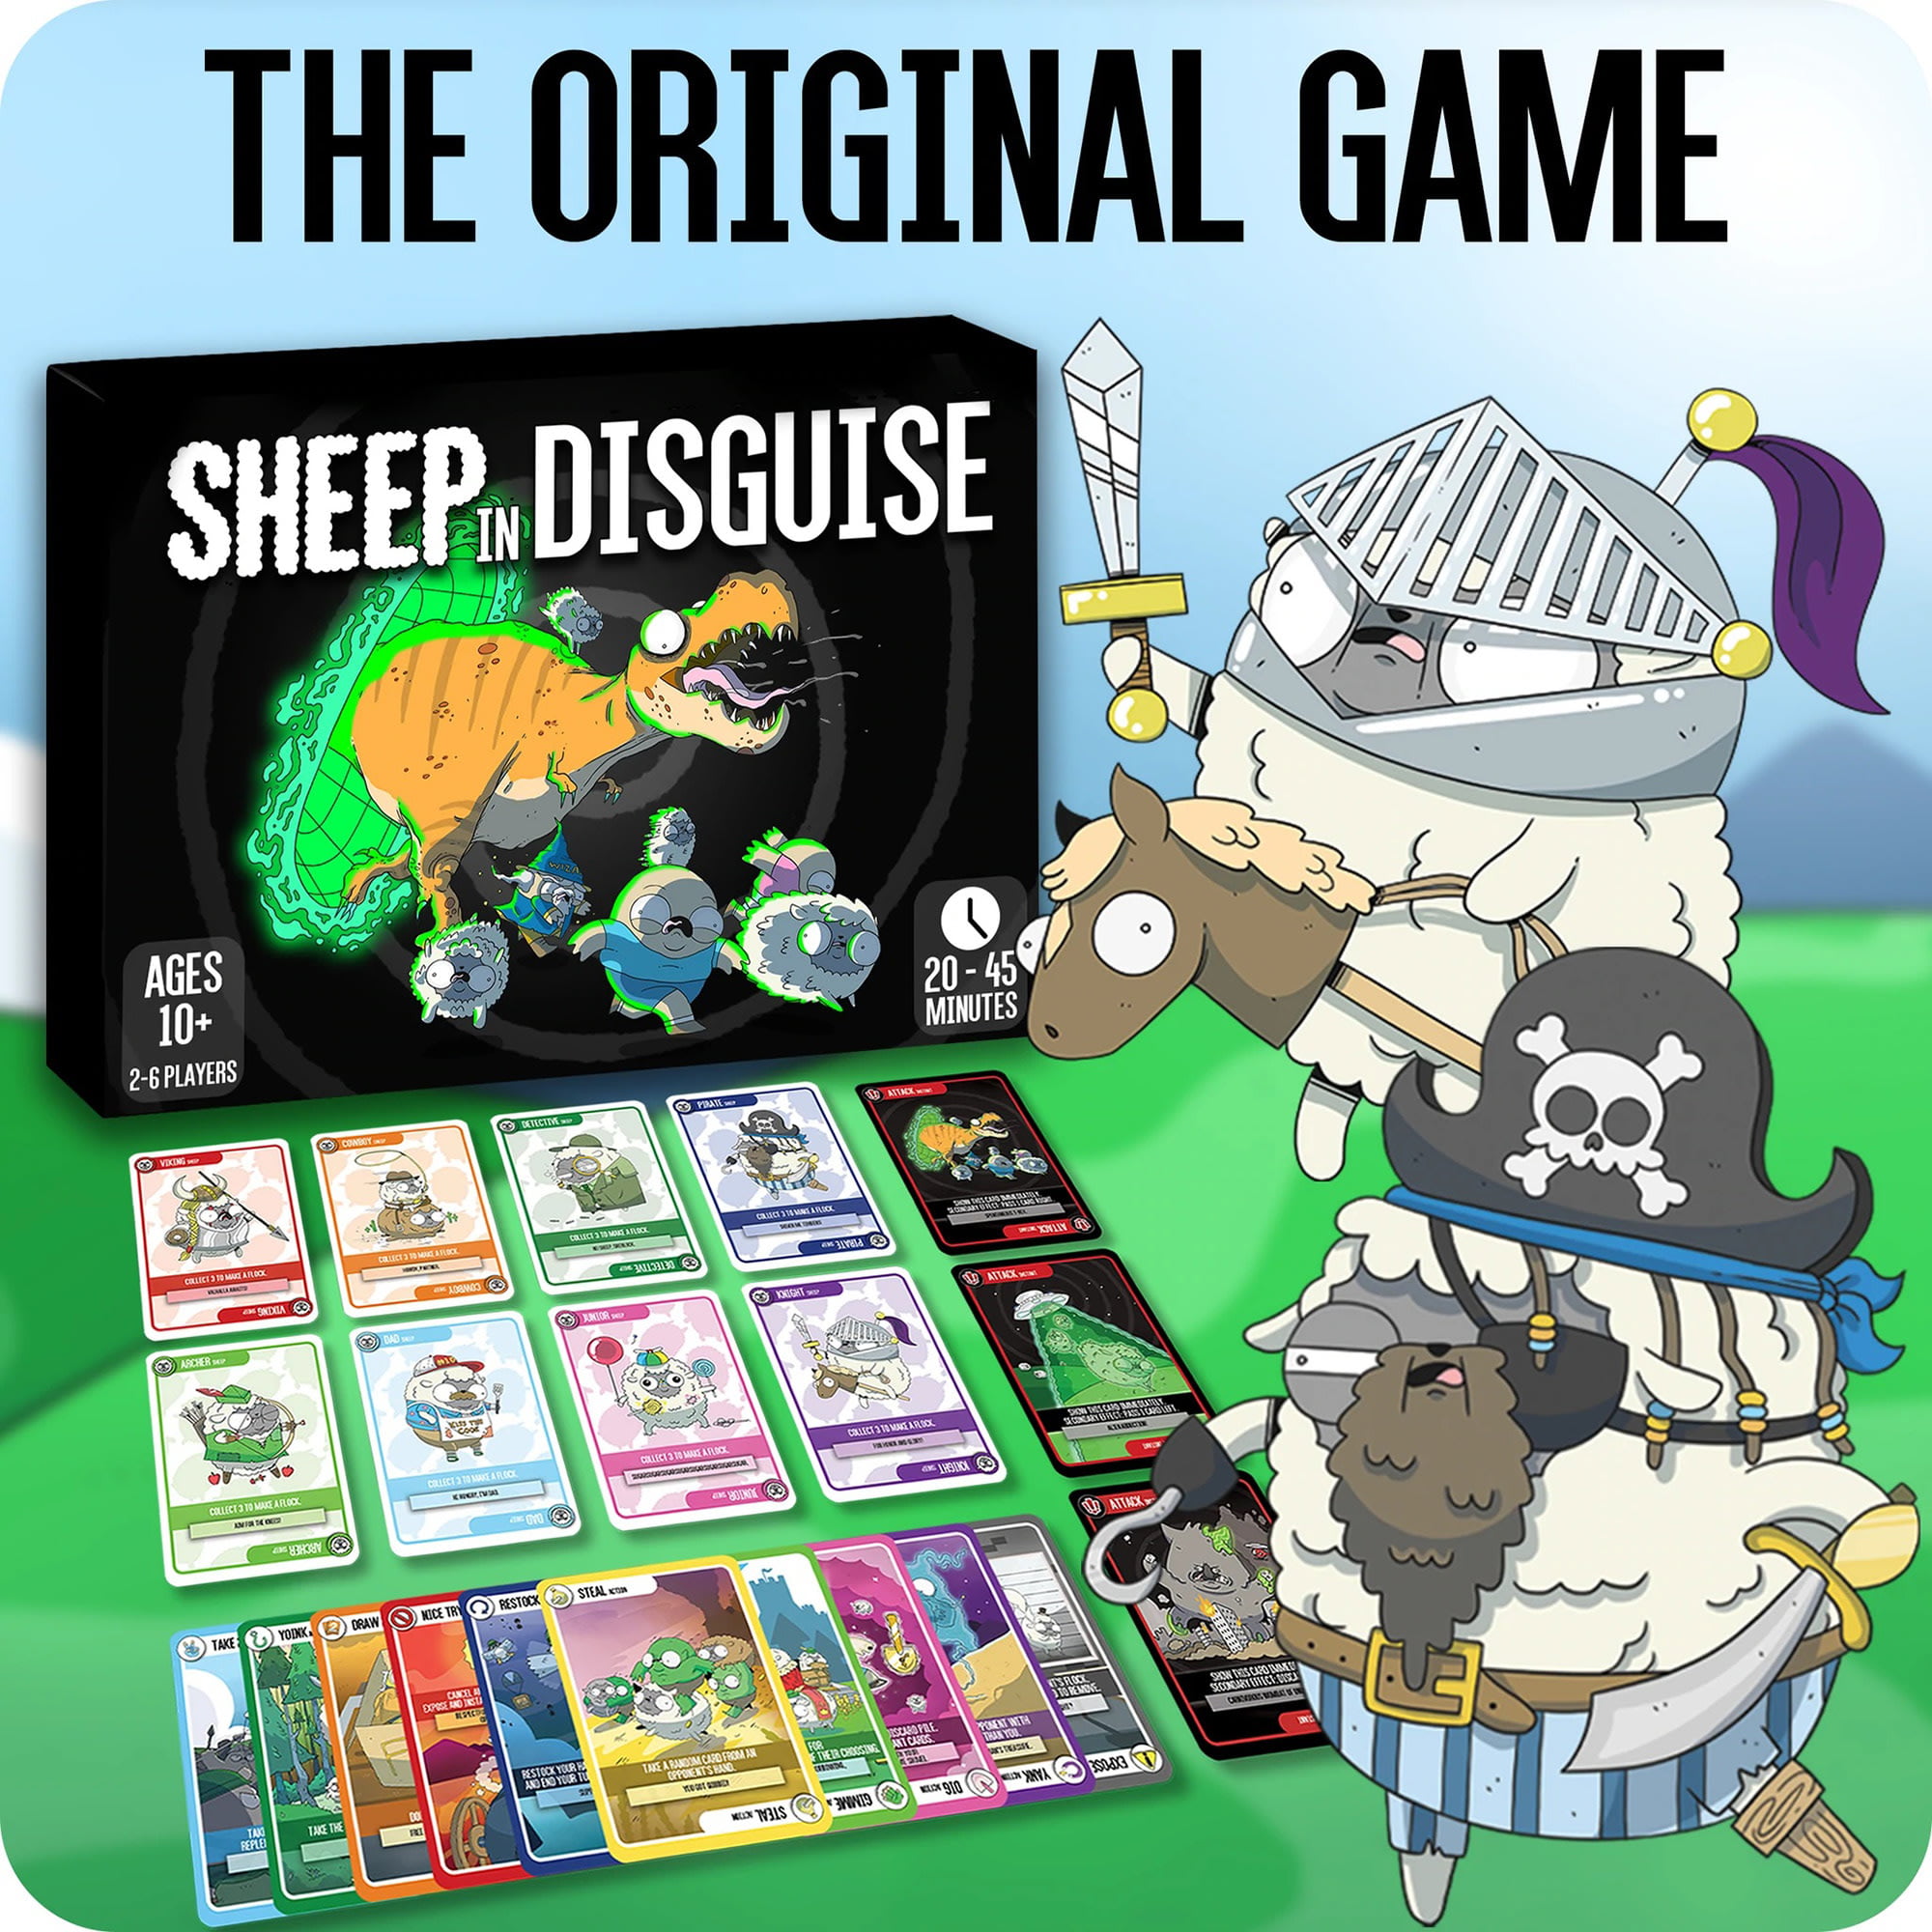 Sheep in Disguise - The Original Core Game, Card Game Packed Full of Sheep, Ages 10+, 2-6 Players, 20-45 Min